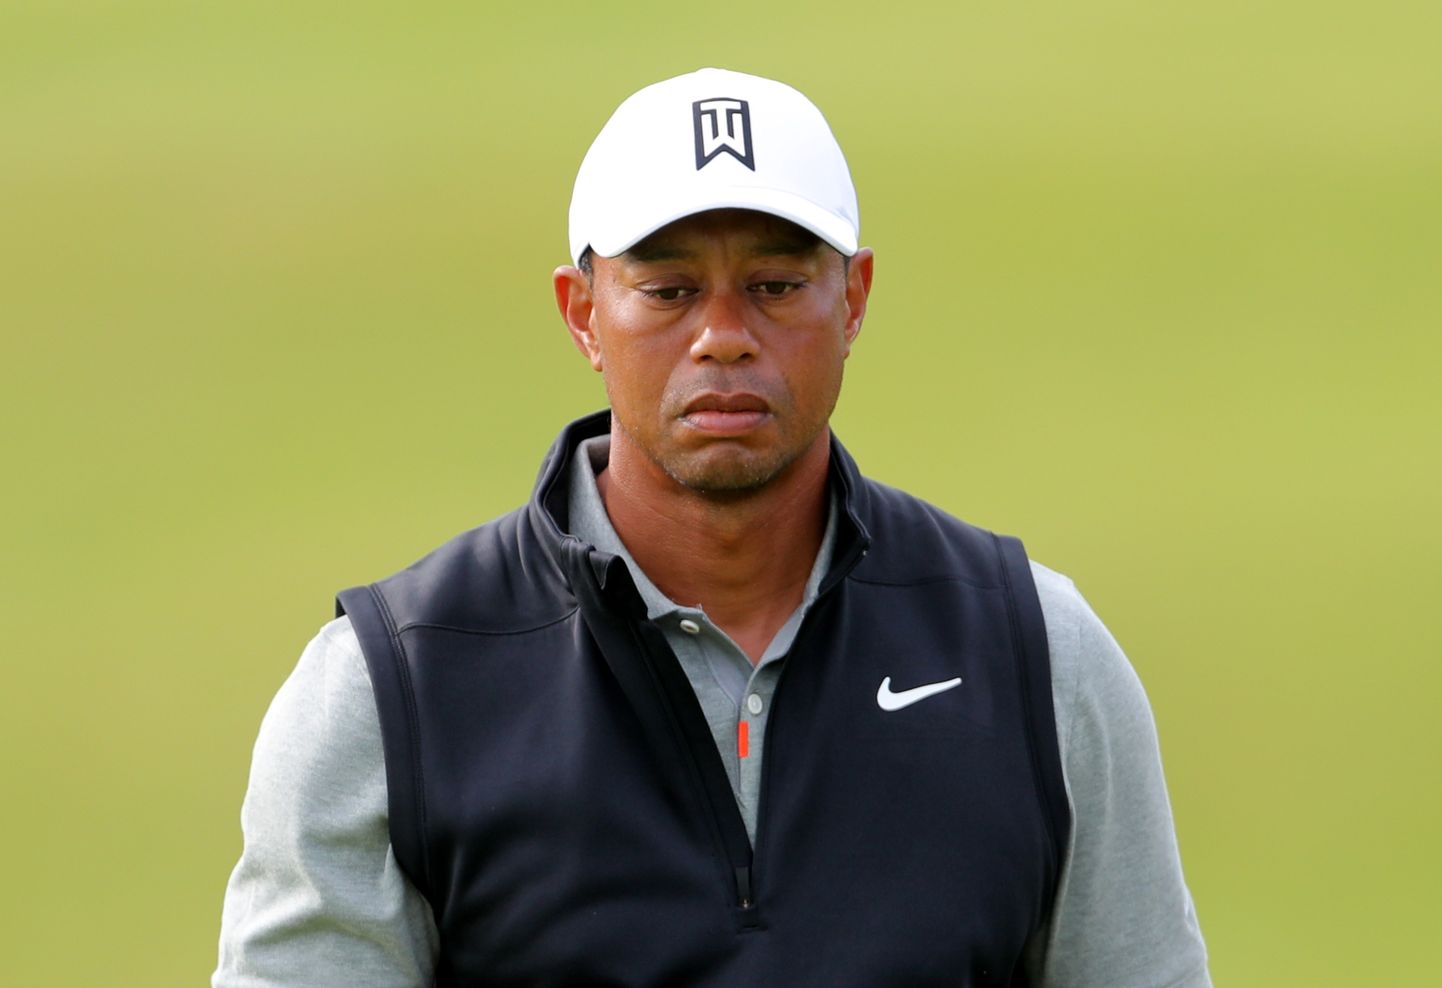 Tiger Woods The Open 2019 turniiril.